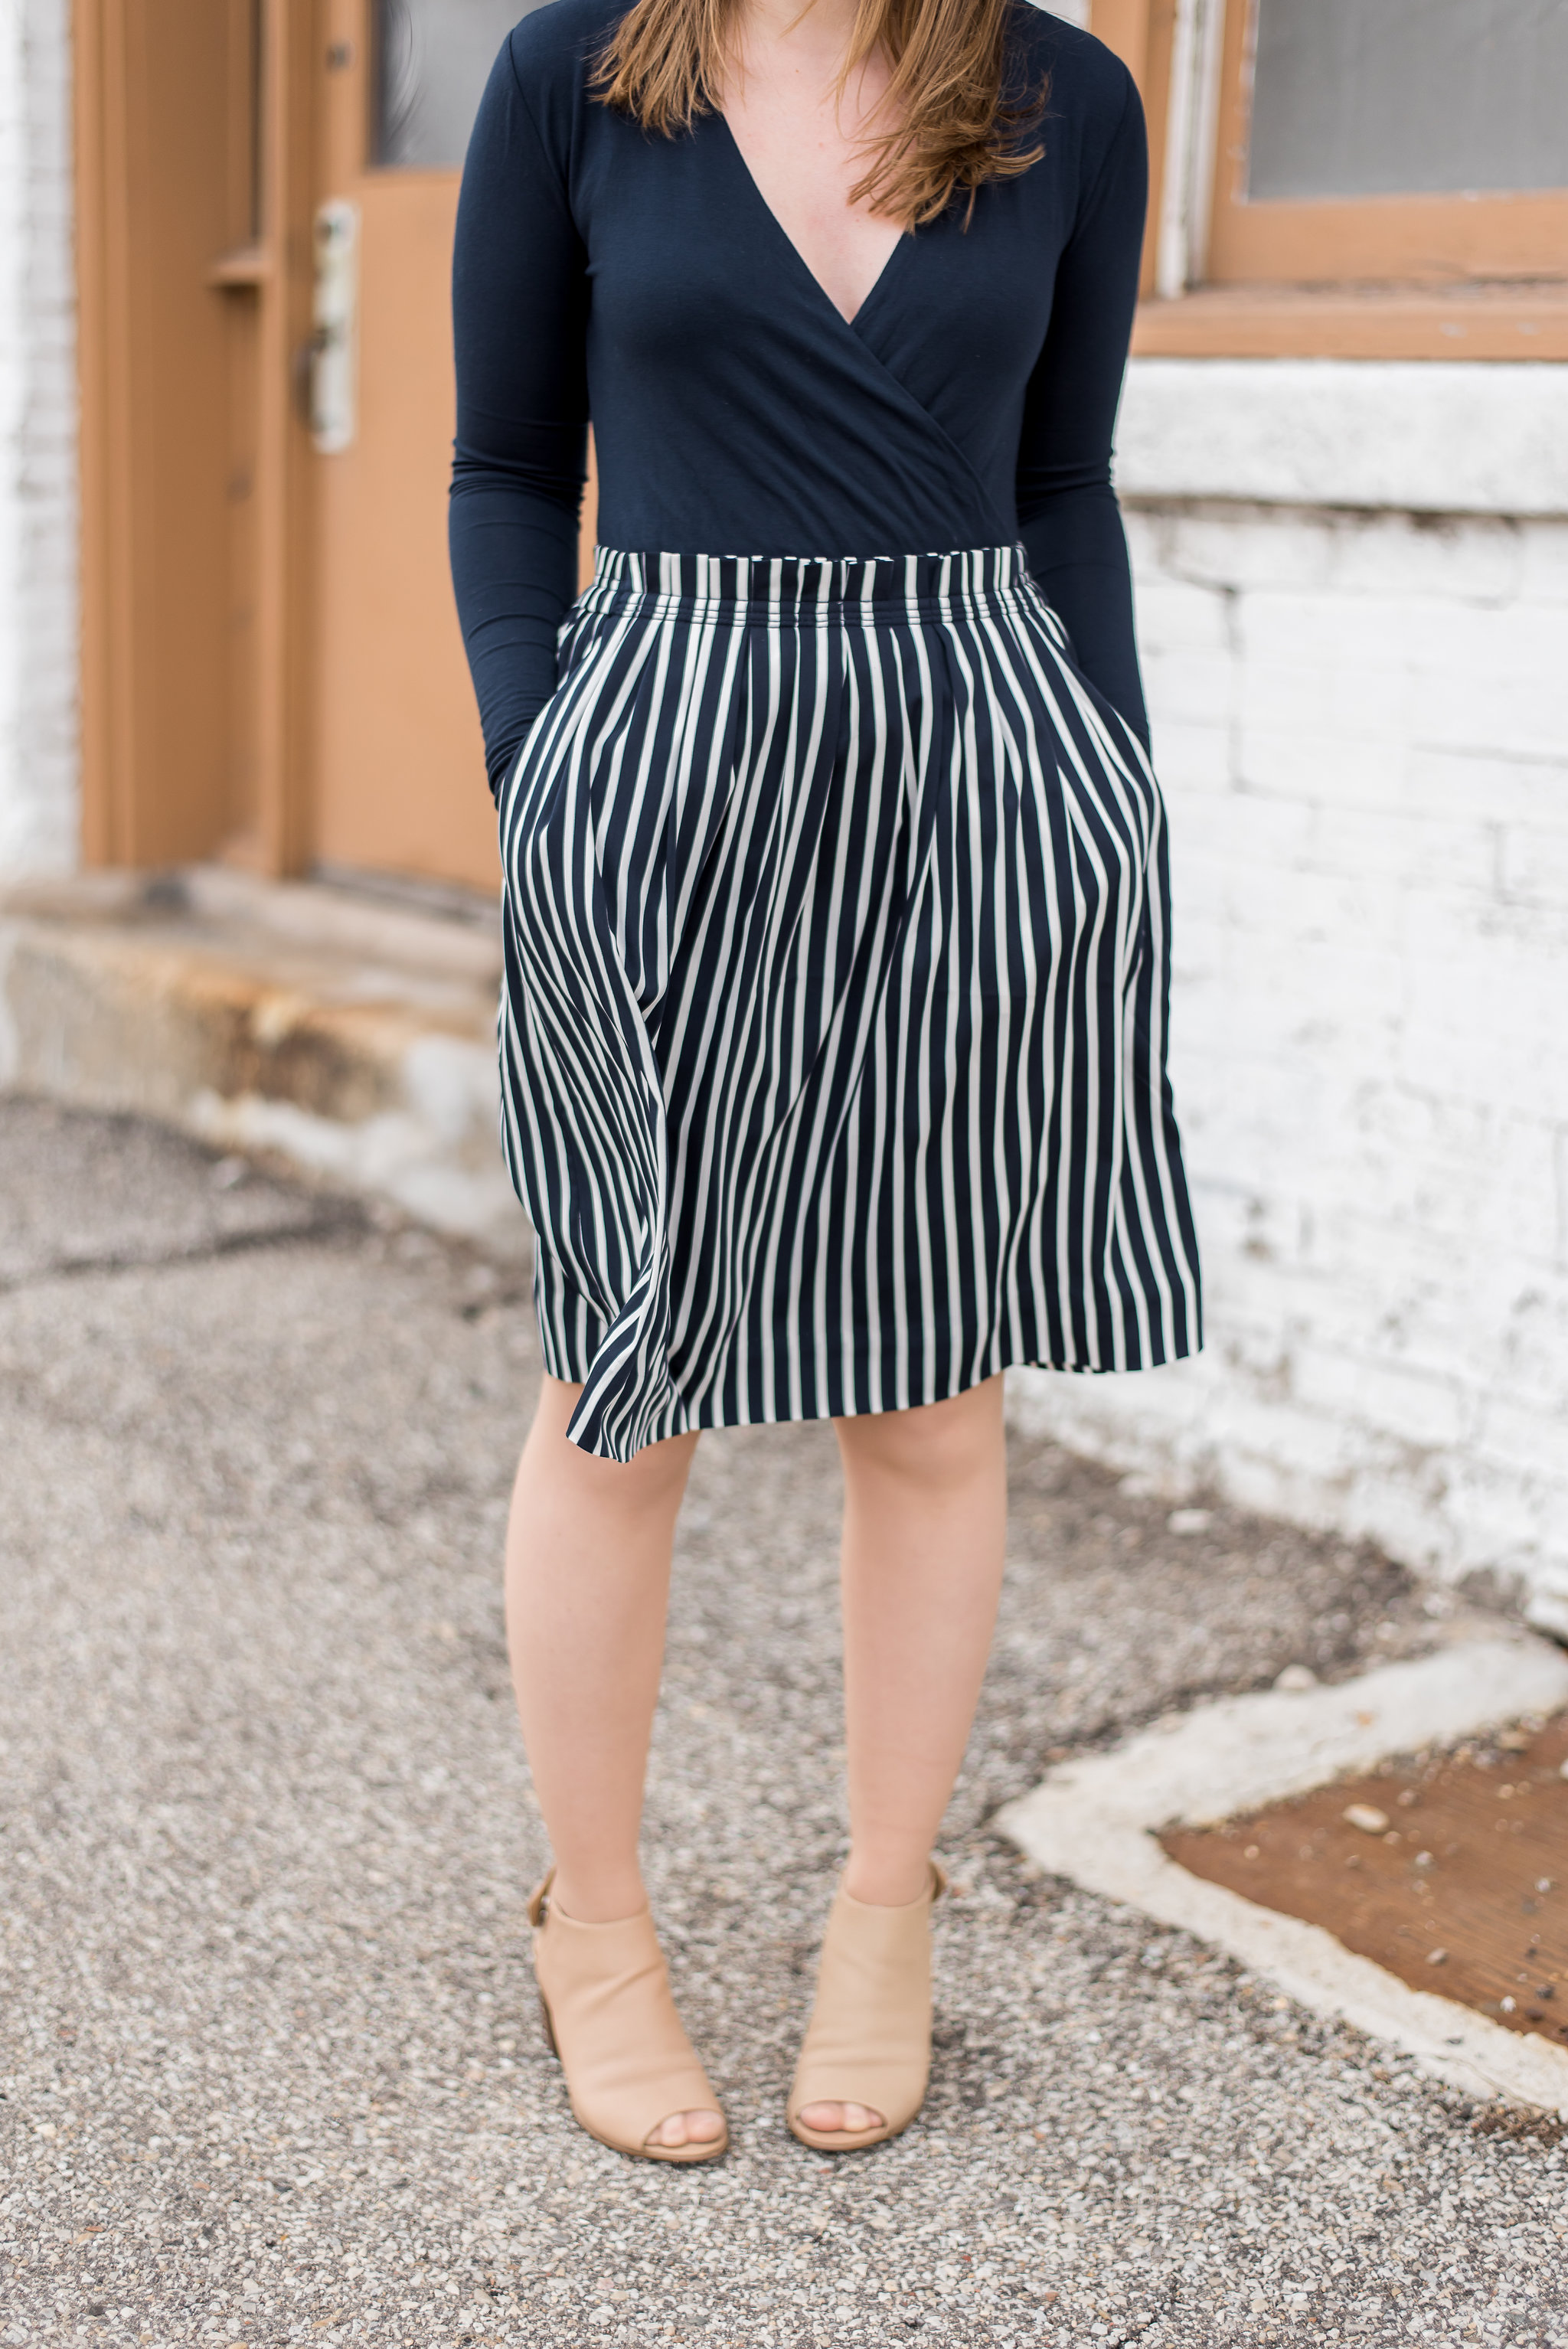 dc blogger woman wearing Striped skirt and bodysuit J Crew Factory